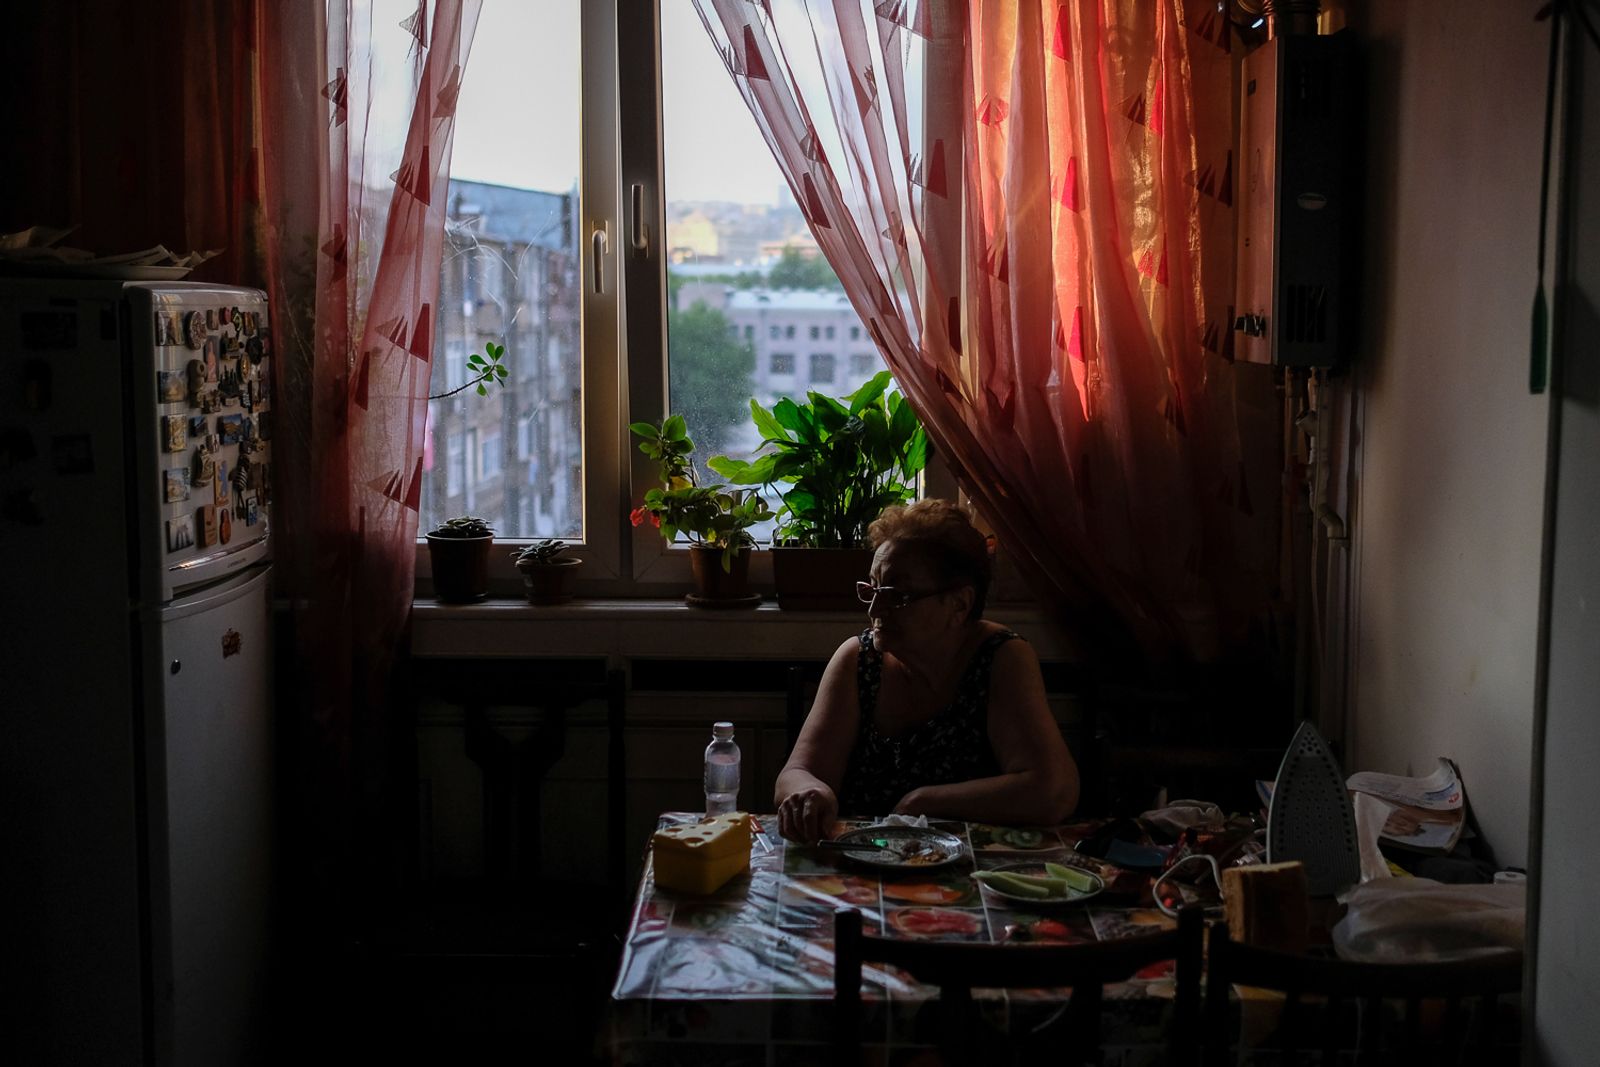 © Hrant Khachatryan - She has her own place in the kitchen where she eats, drinks coffee, has some snacks and solves crosswords.